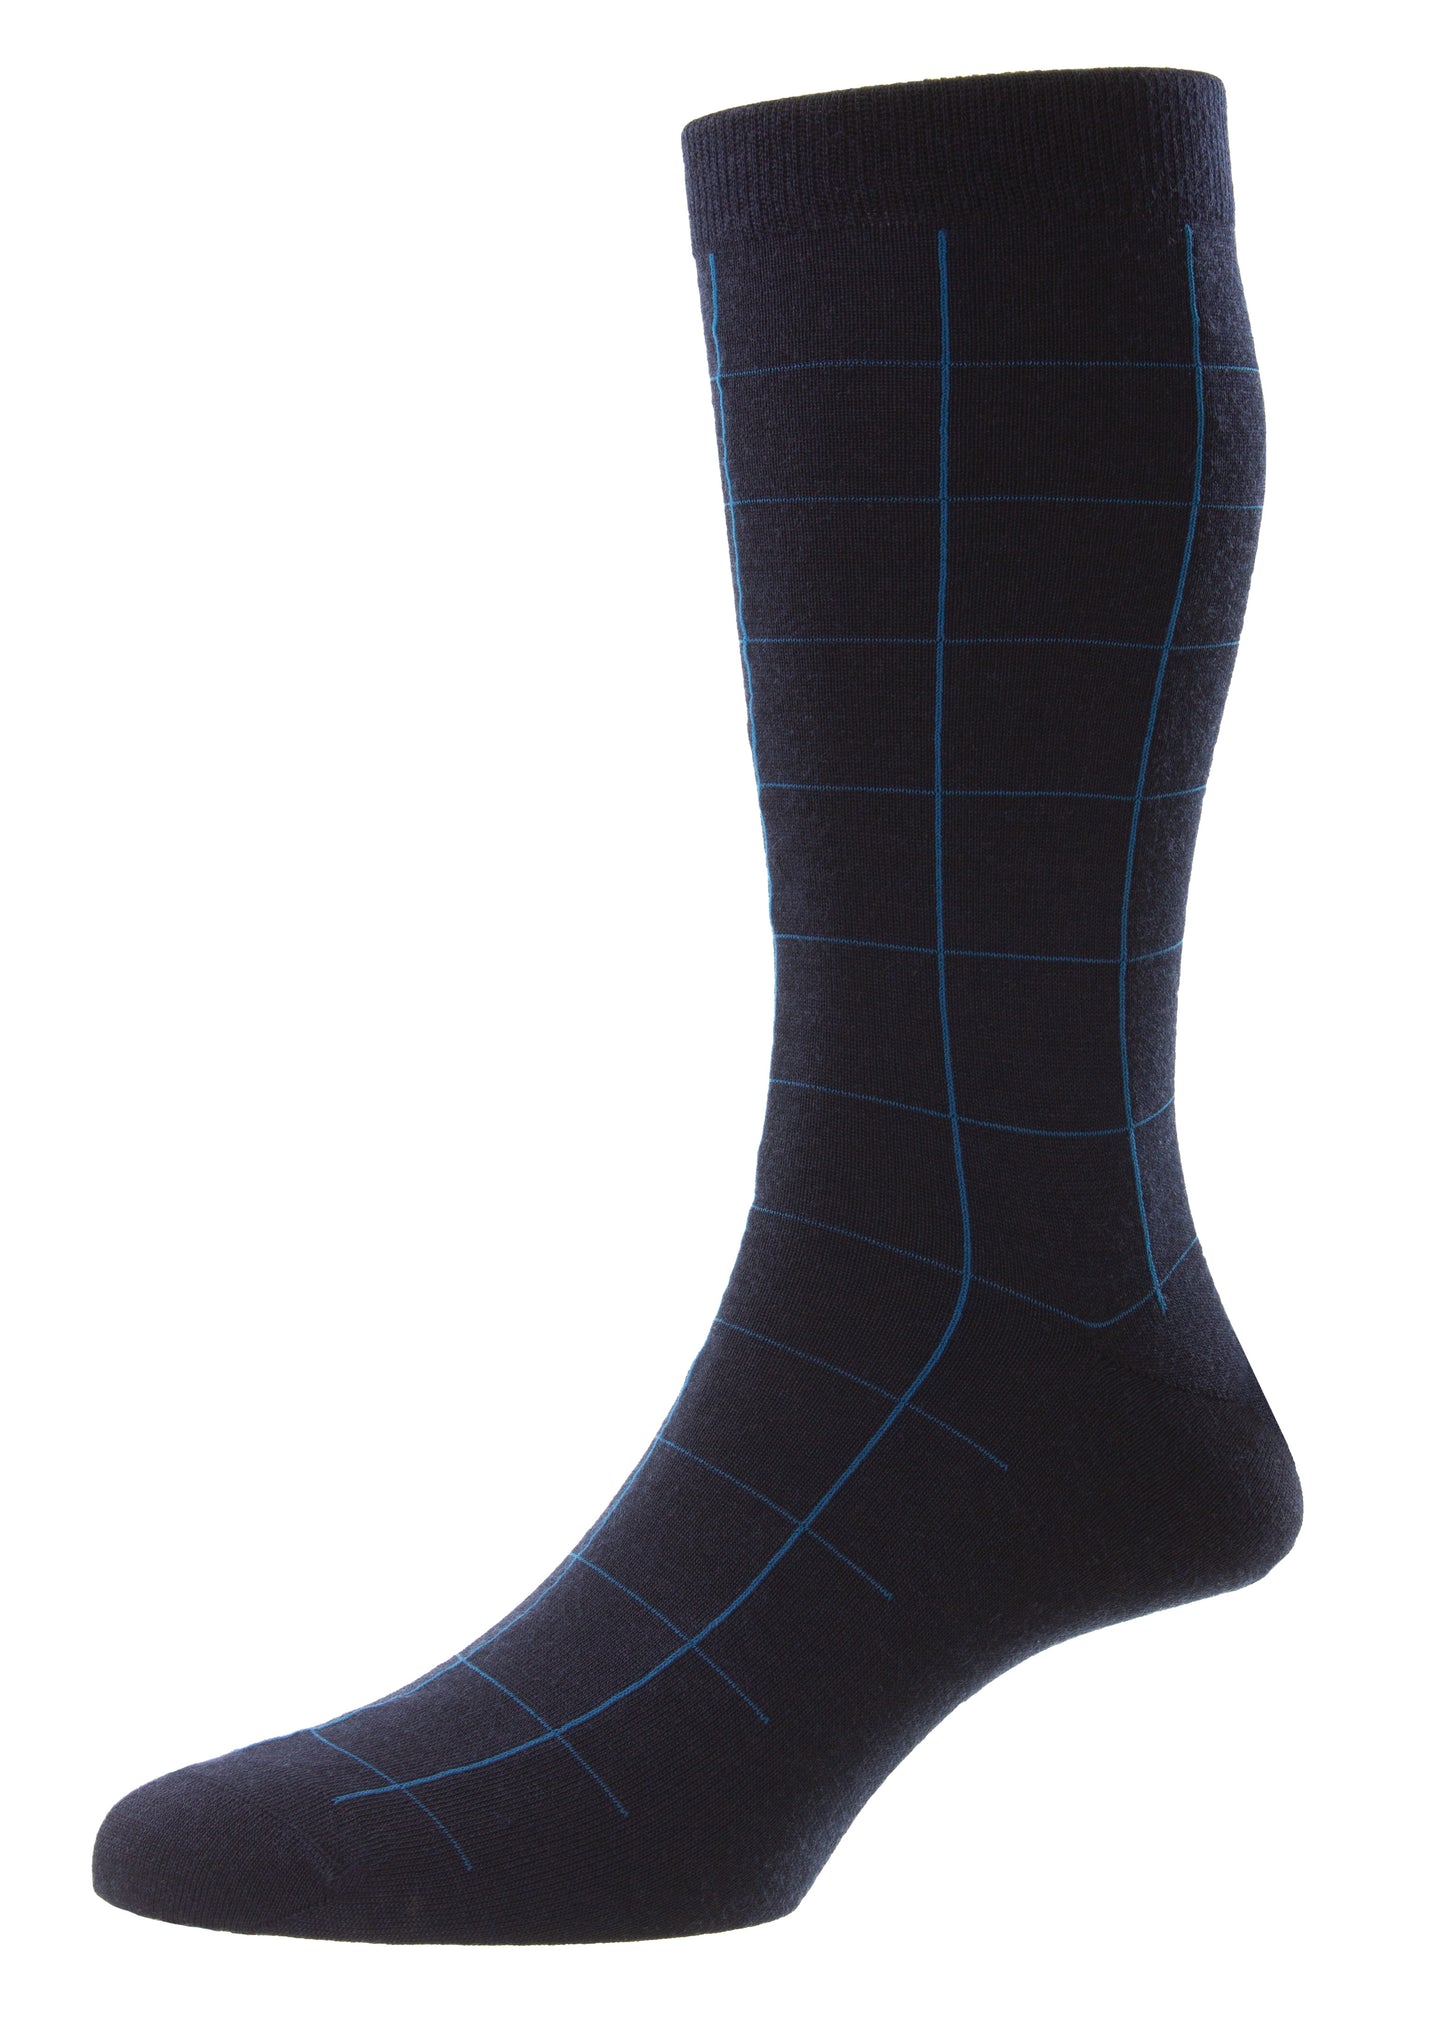 Vintage Collection "Westleigh" Sock